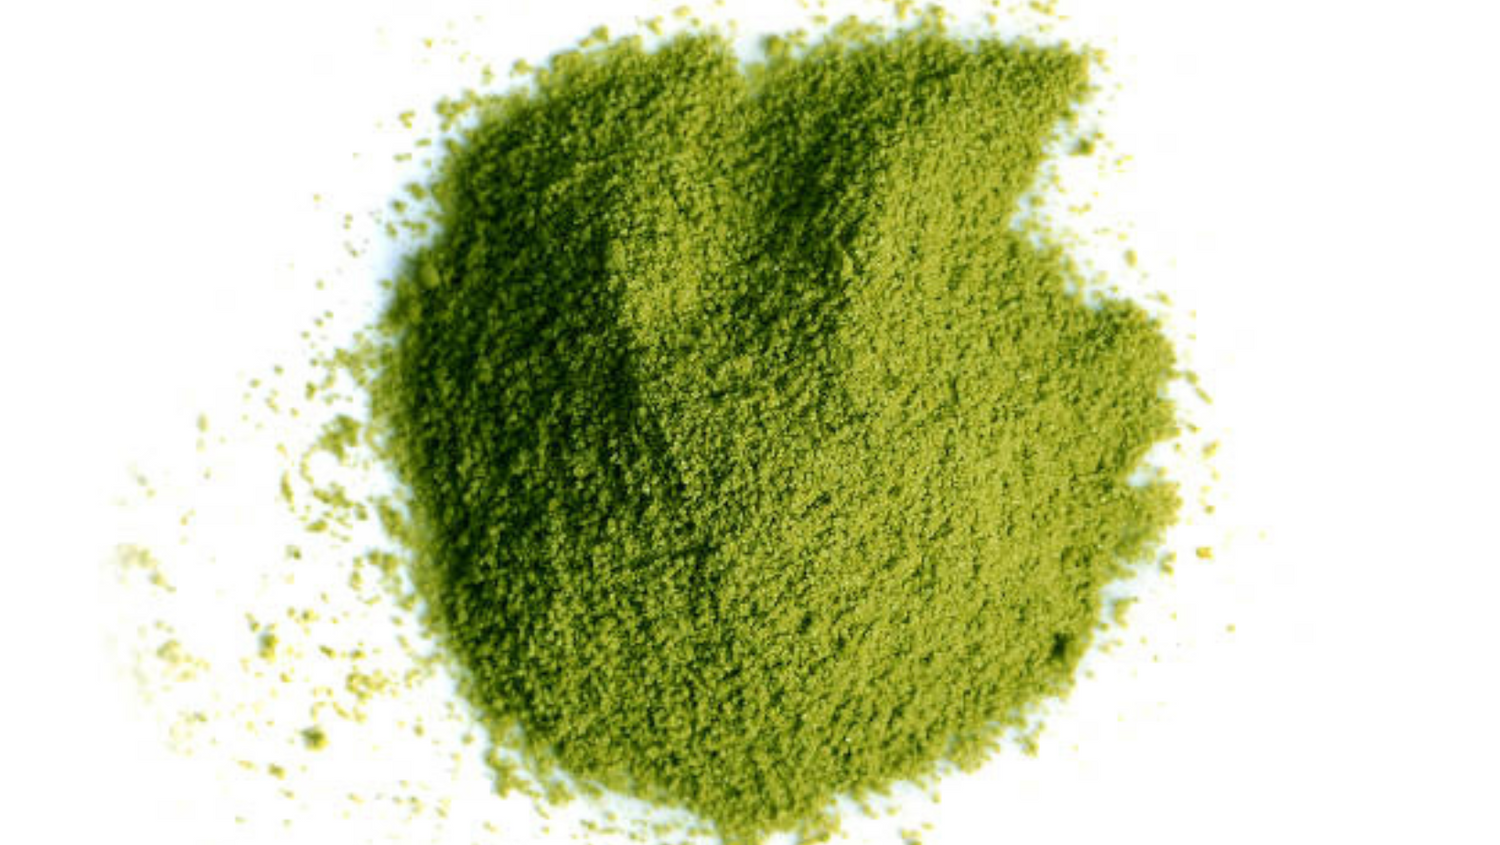 What to look for: Greens Powder